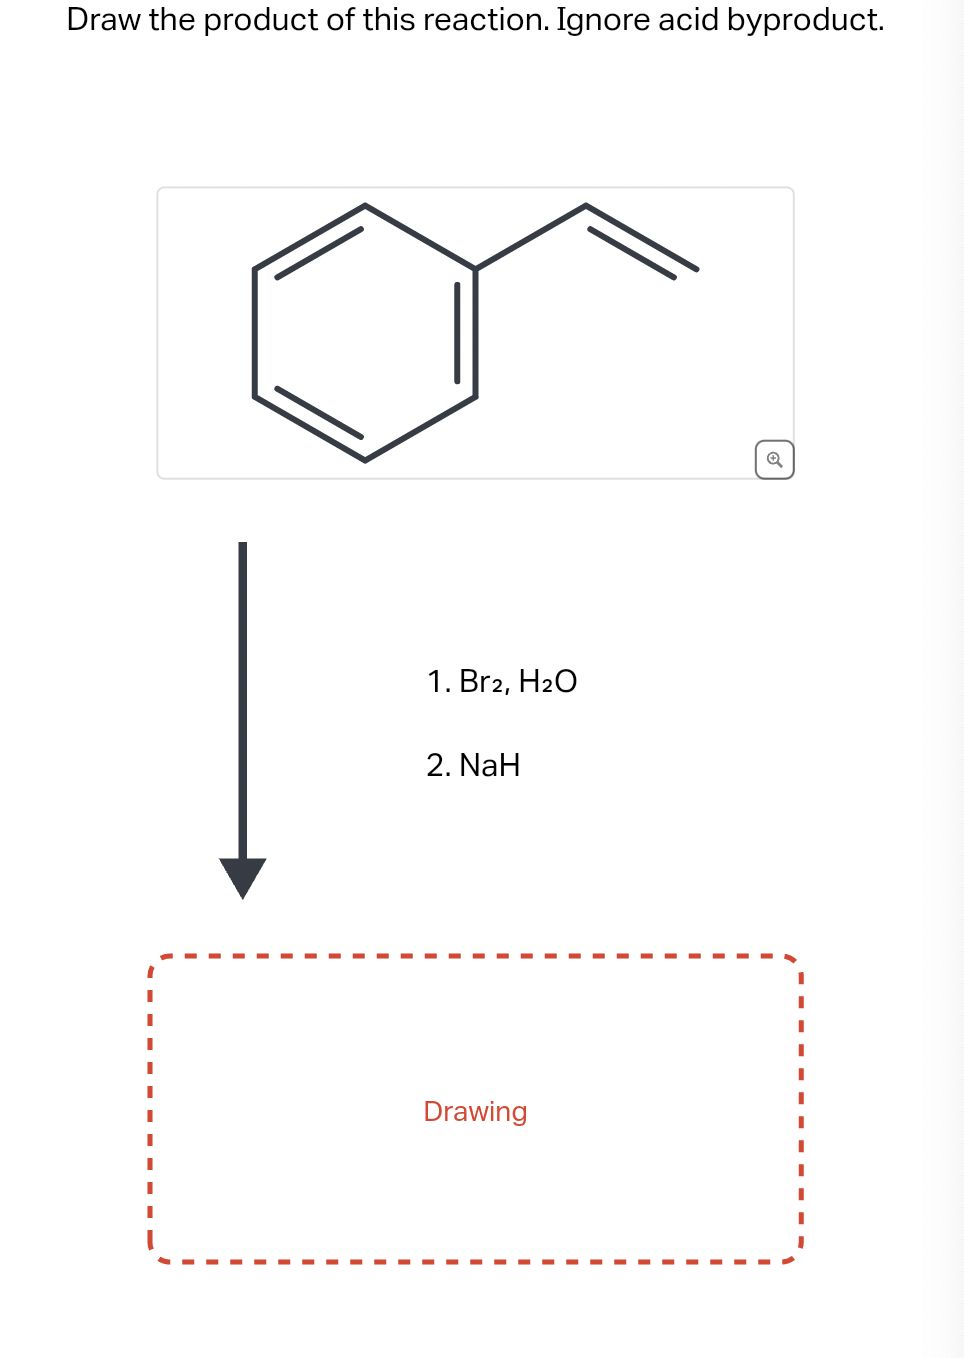 Draw the product of this reaction. Ignore acid byproduct.
1. Br2, H₂O
2. NaH
Drawing